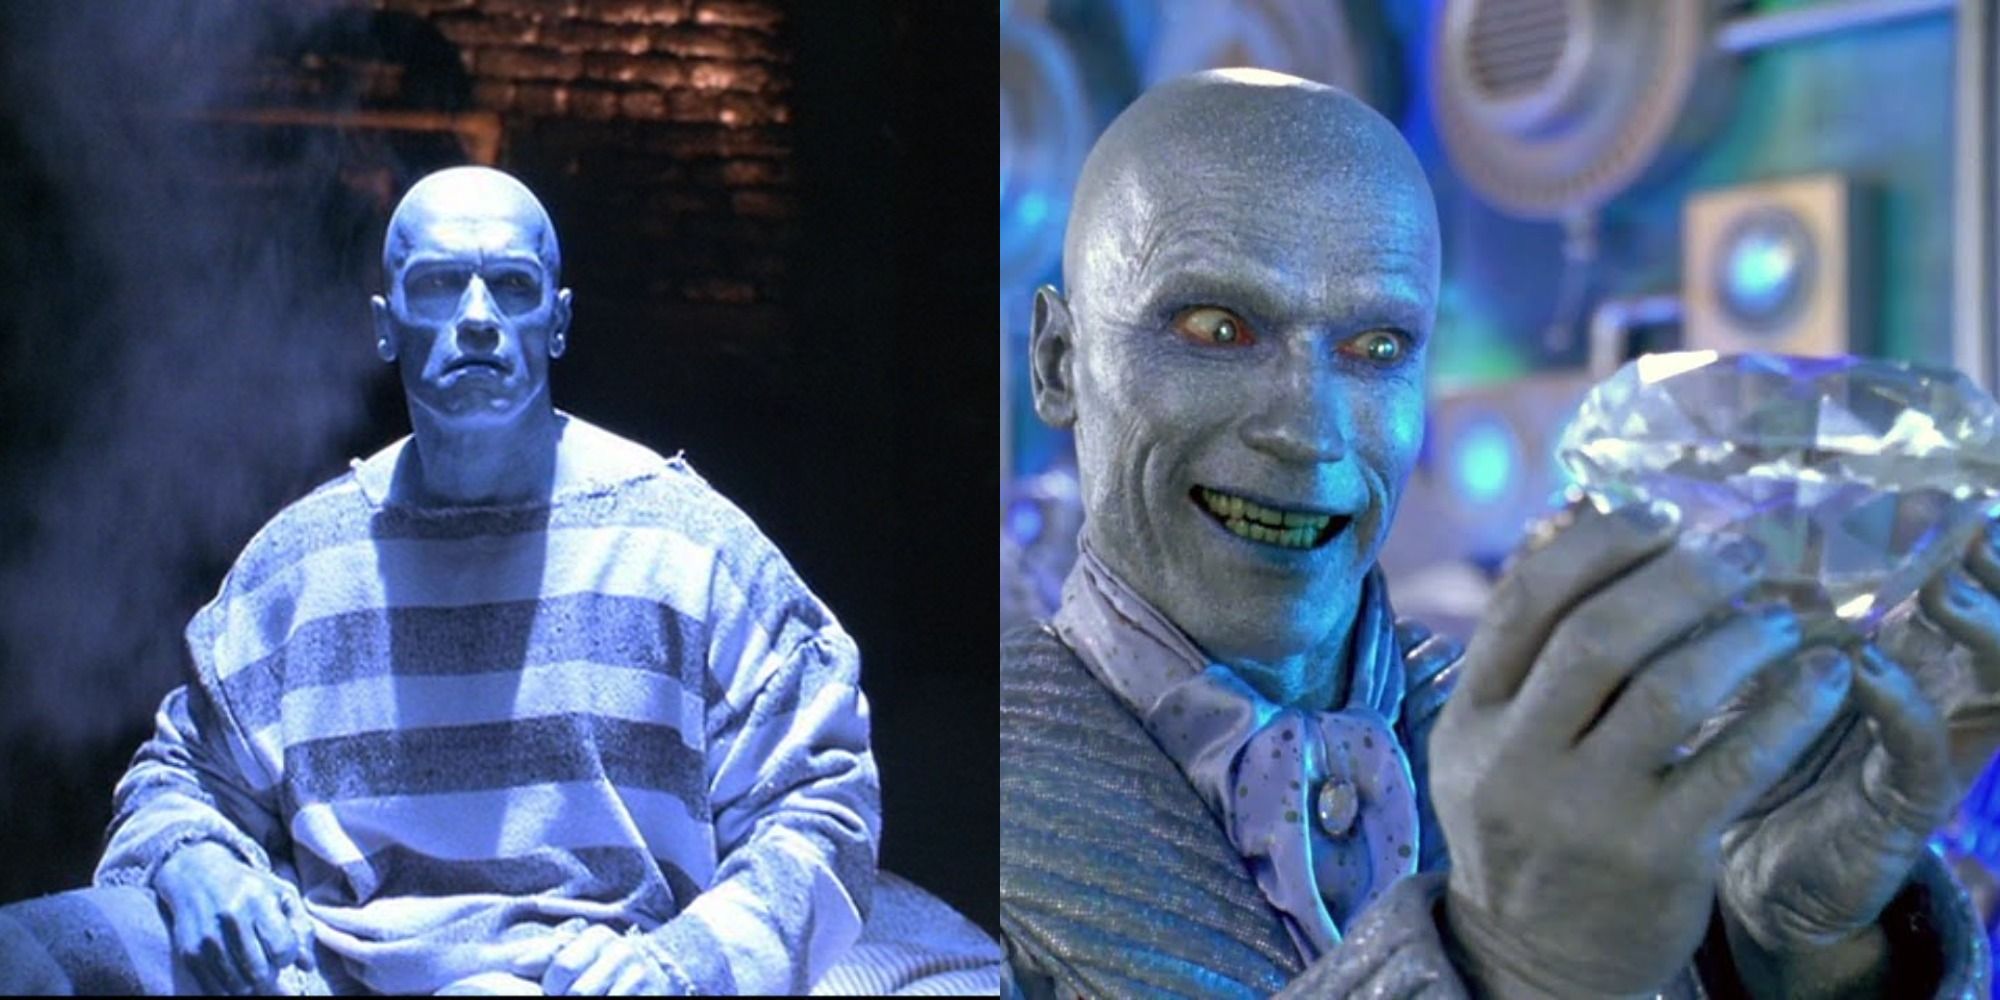 A split image of Mr. Freeze sitting in a cell and holding a diamond in Batman & Robin